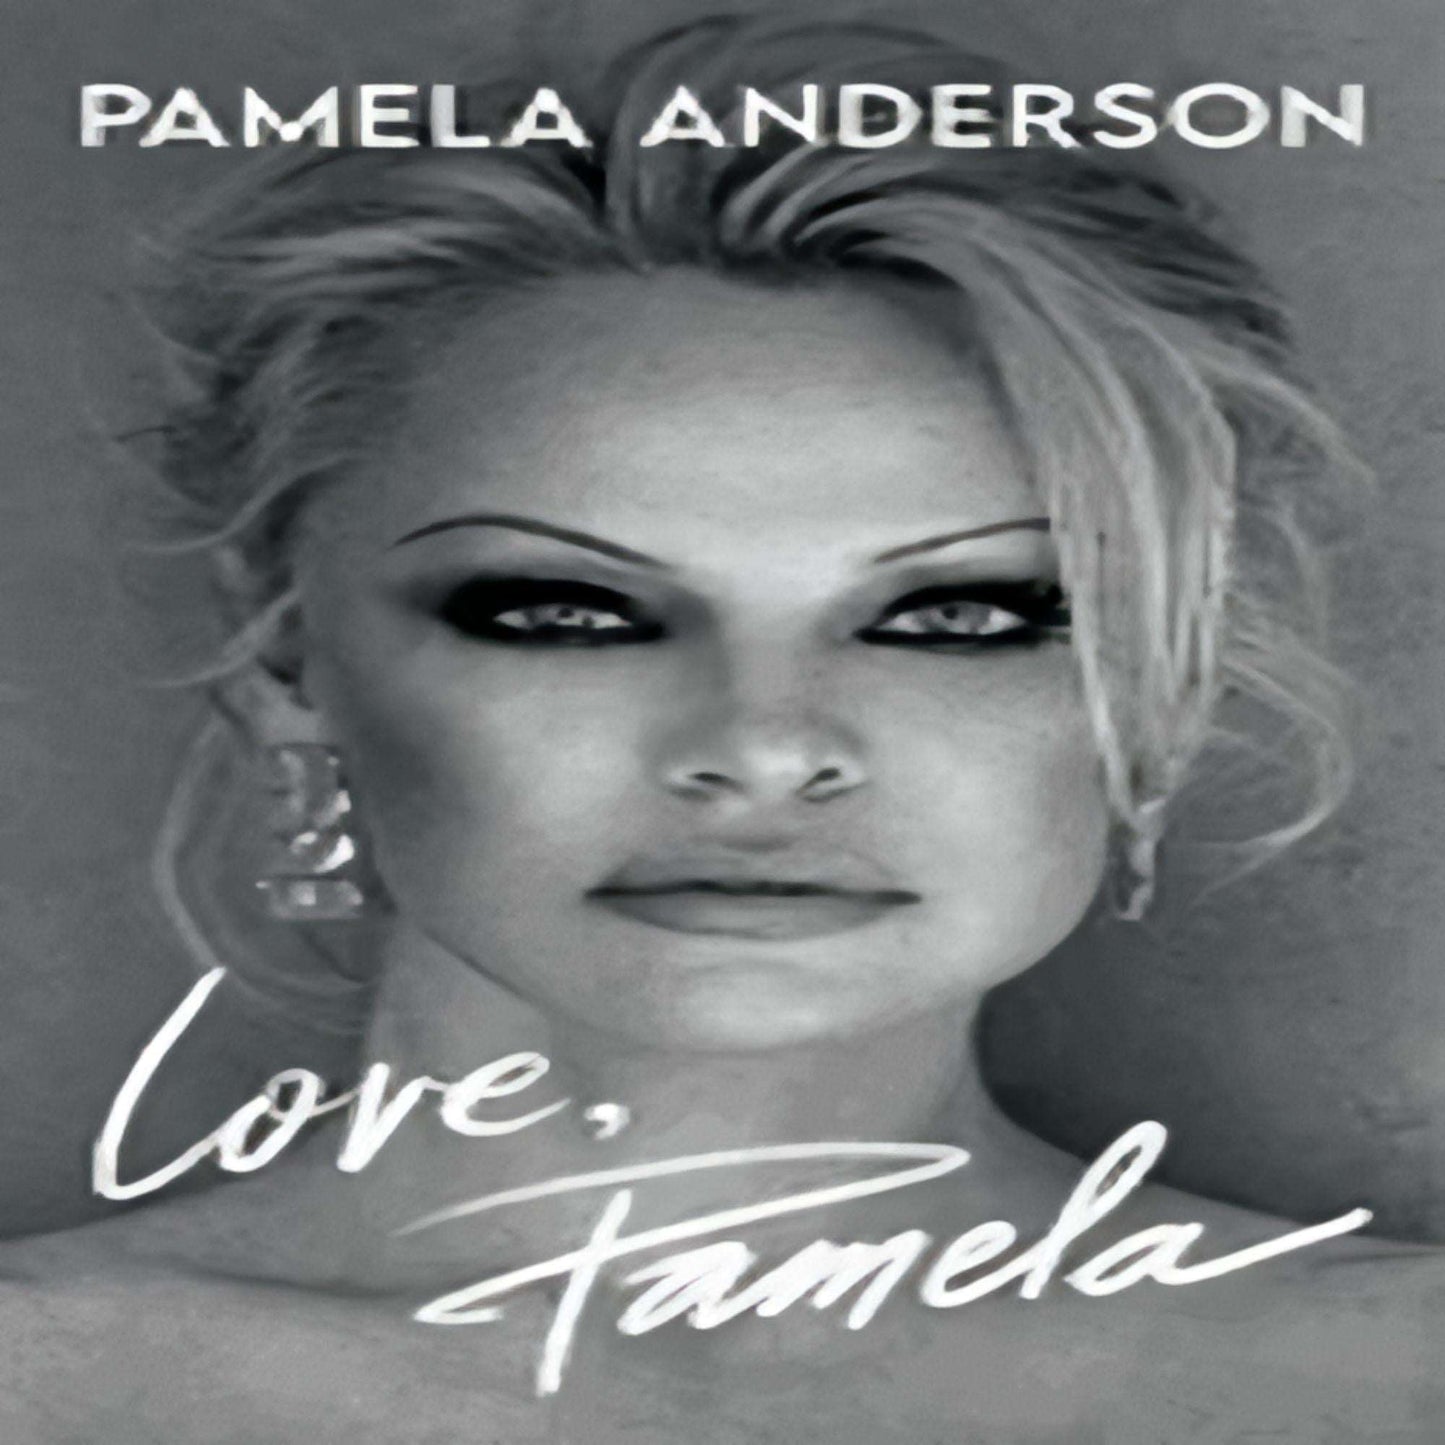 Love, Pamela: A Memoir of Prose, Poetry, and Truth98-021923-0063226561DPGBOOKSTORE.COM. Today's Bestsellers.